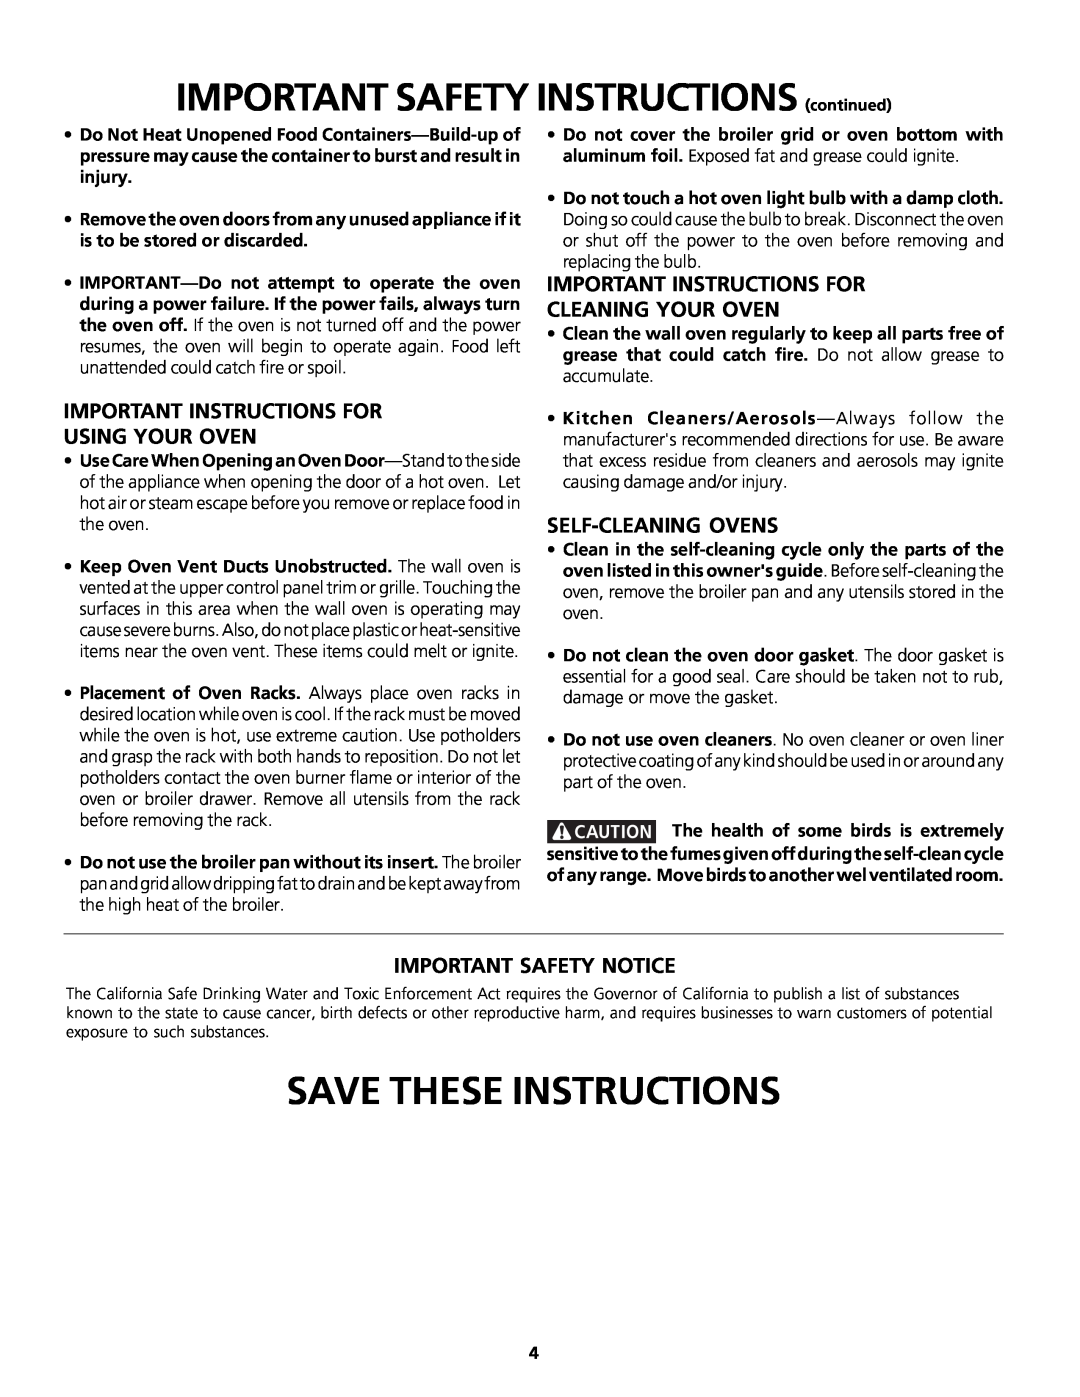 Frigidaire Gas Wall Oven IMPORTANT SAFETY INSTRUCTIONS continued, Save These Instructions, Self-Cleaning Ovens 